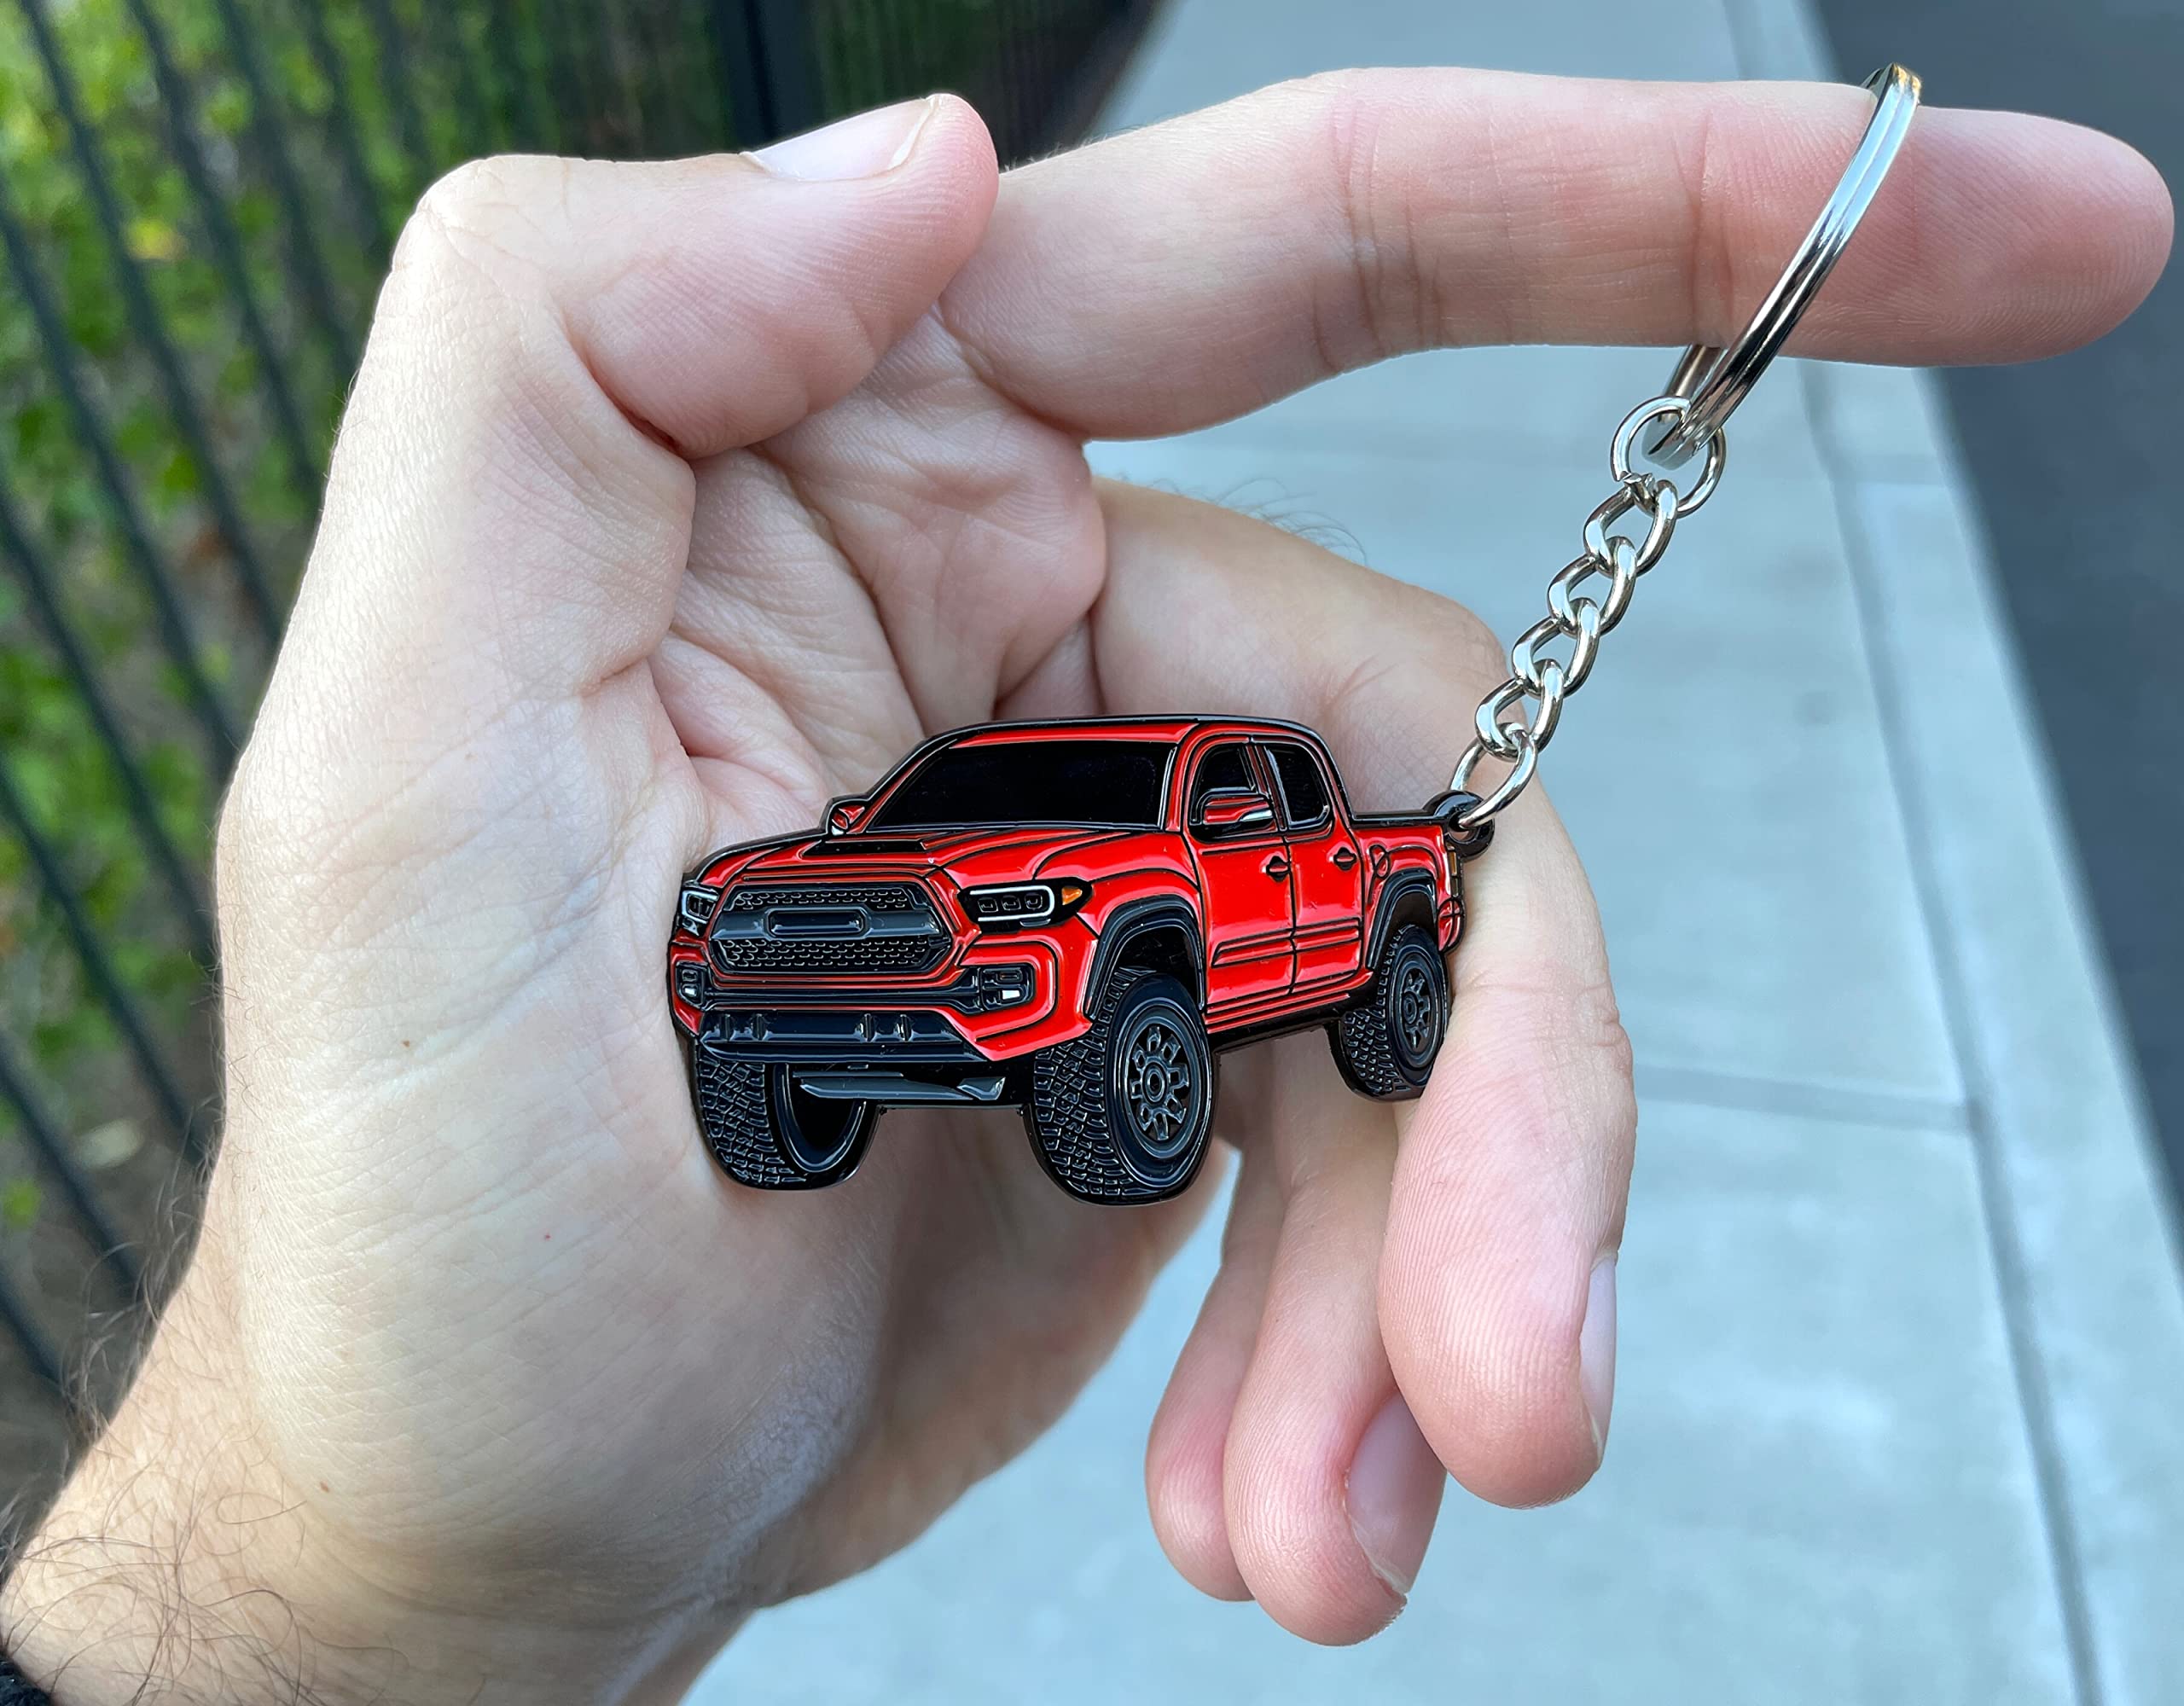 FOUR WHEEL BEAST Tacoma Keychain - Tacoma Accessories 2016-2022 mods - Pro Sport Off Road Cool PRO Key Chain Fob Cover - 3rd gen off road Toy Truck (Red)